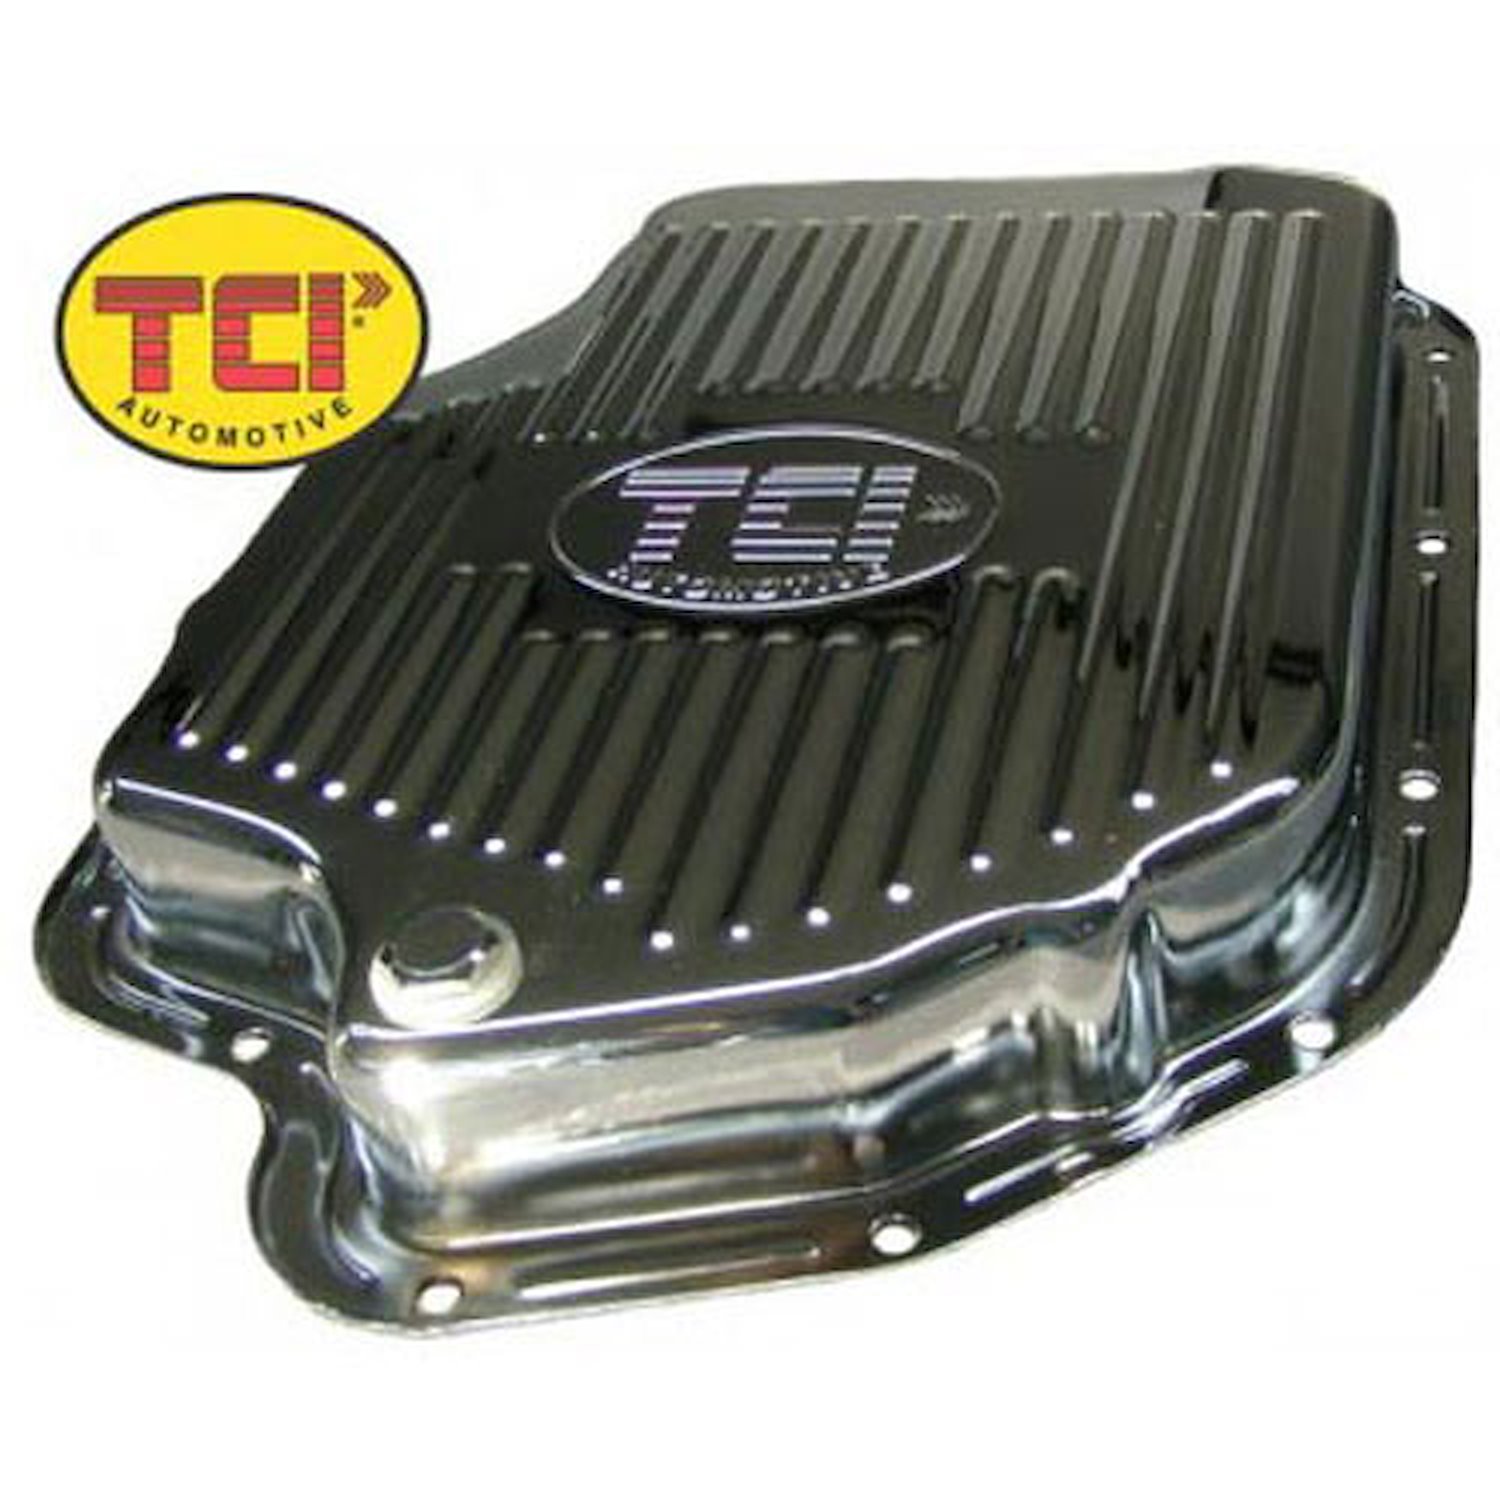 Chrome-Plated Steel Transmission Pan GM TH400